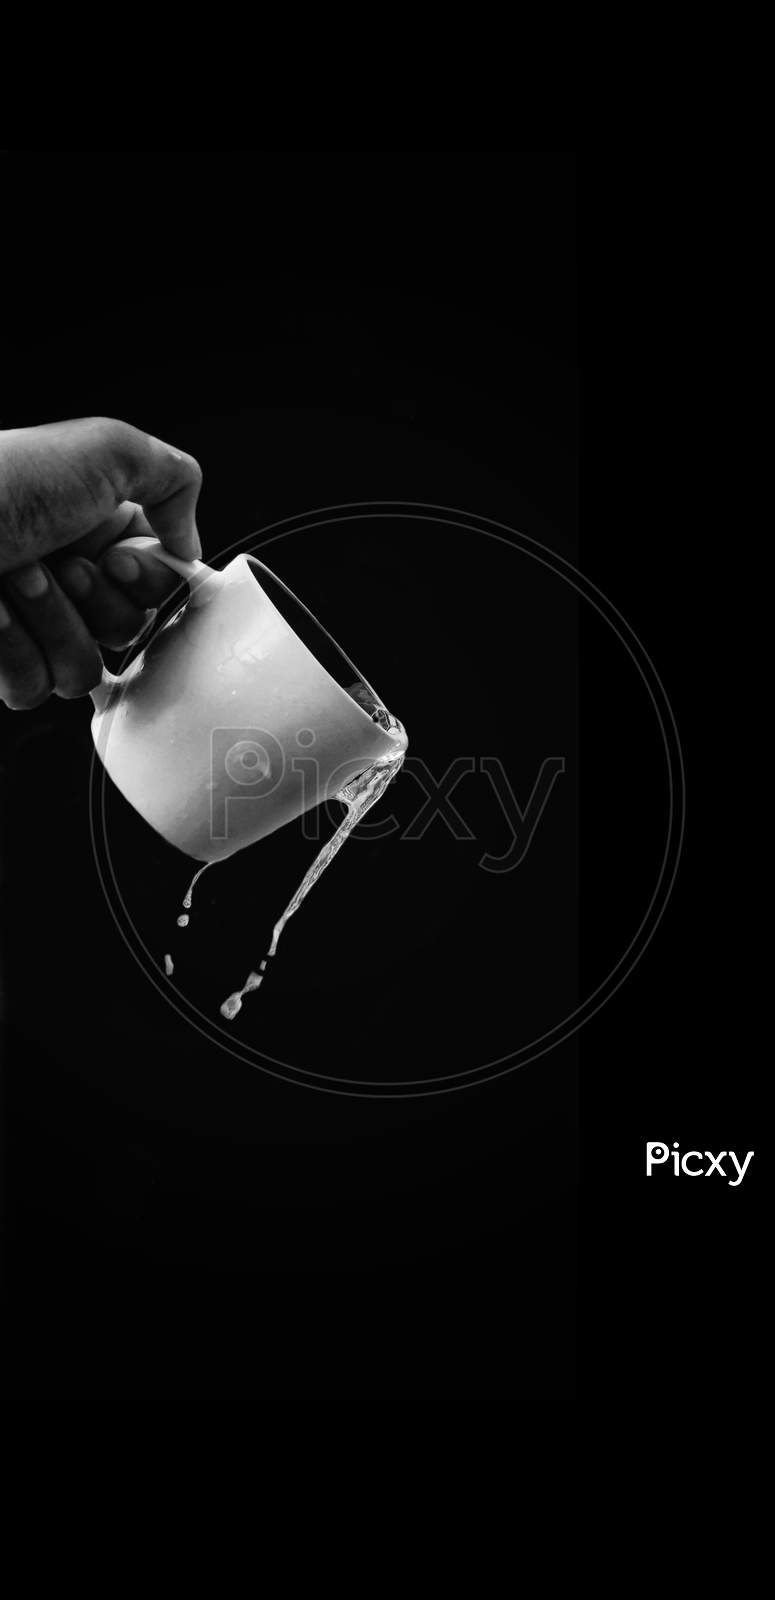 Black and white portrait of water falling from a cup